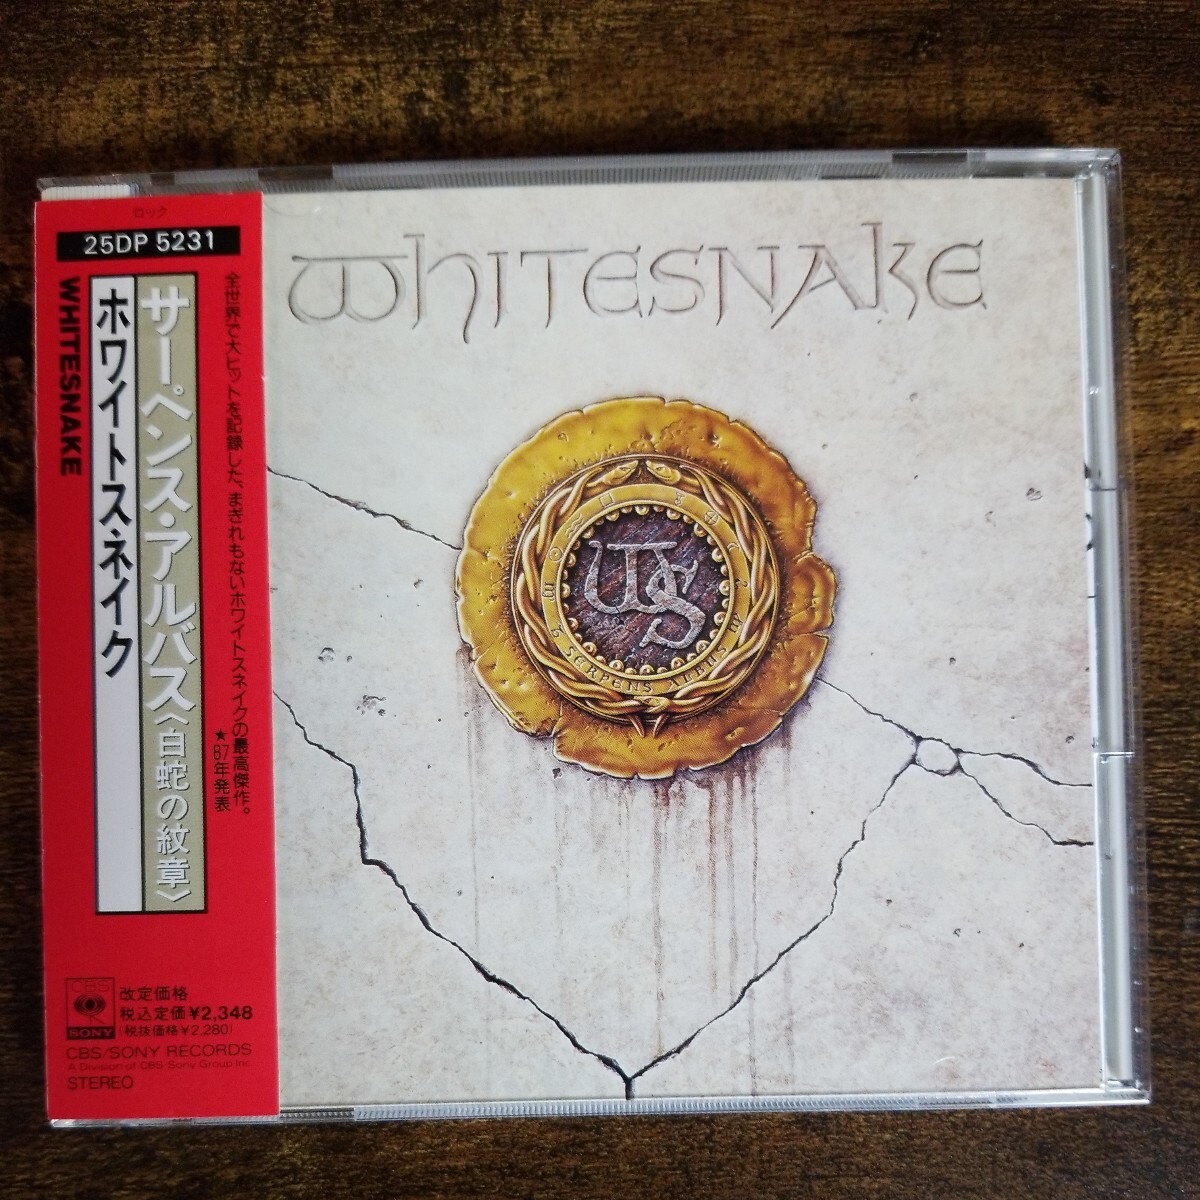 [ domestic record CD obi attaching ] white Sune iksa- pence * Alba s( white .. . chapter ) WHITESNAKE 1987 1988 year domestic repeated departure version control number J